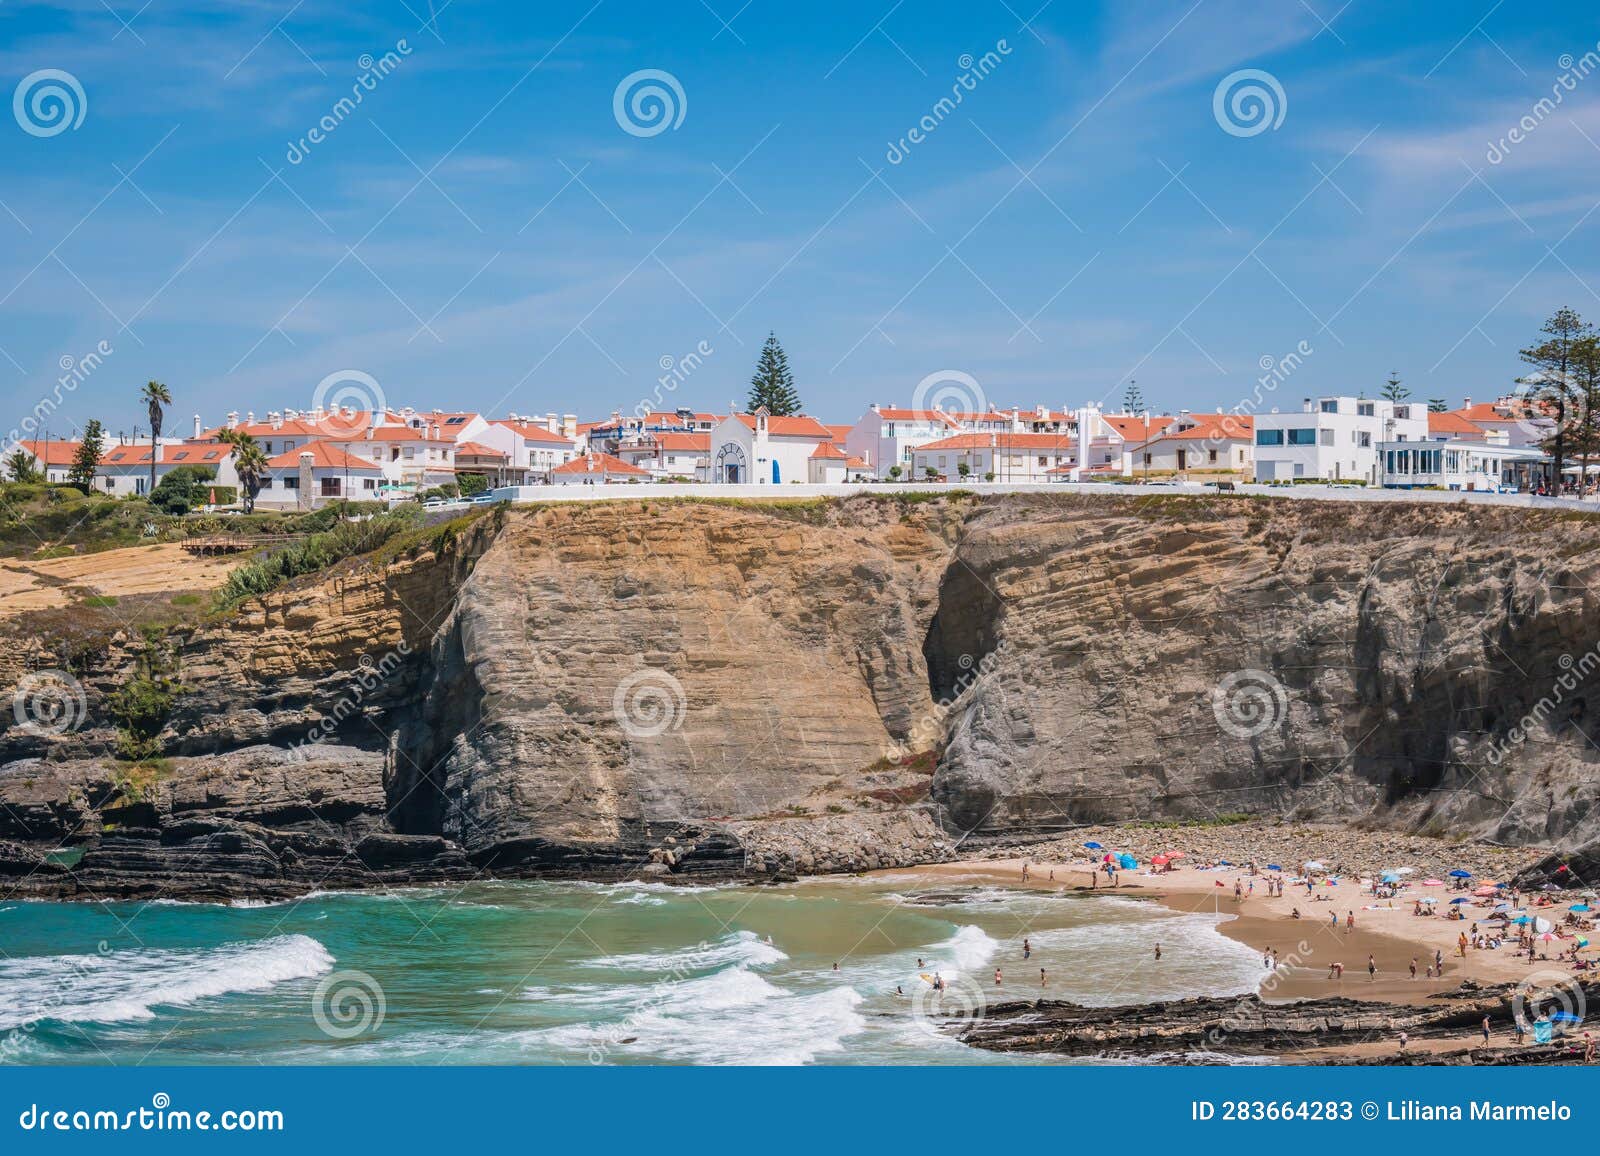 sea and waves on zambujeira do mar beach with village architecture on top of cliff, odemira - alentejo portugal